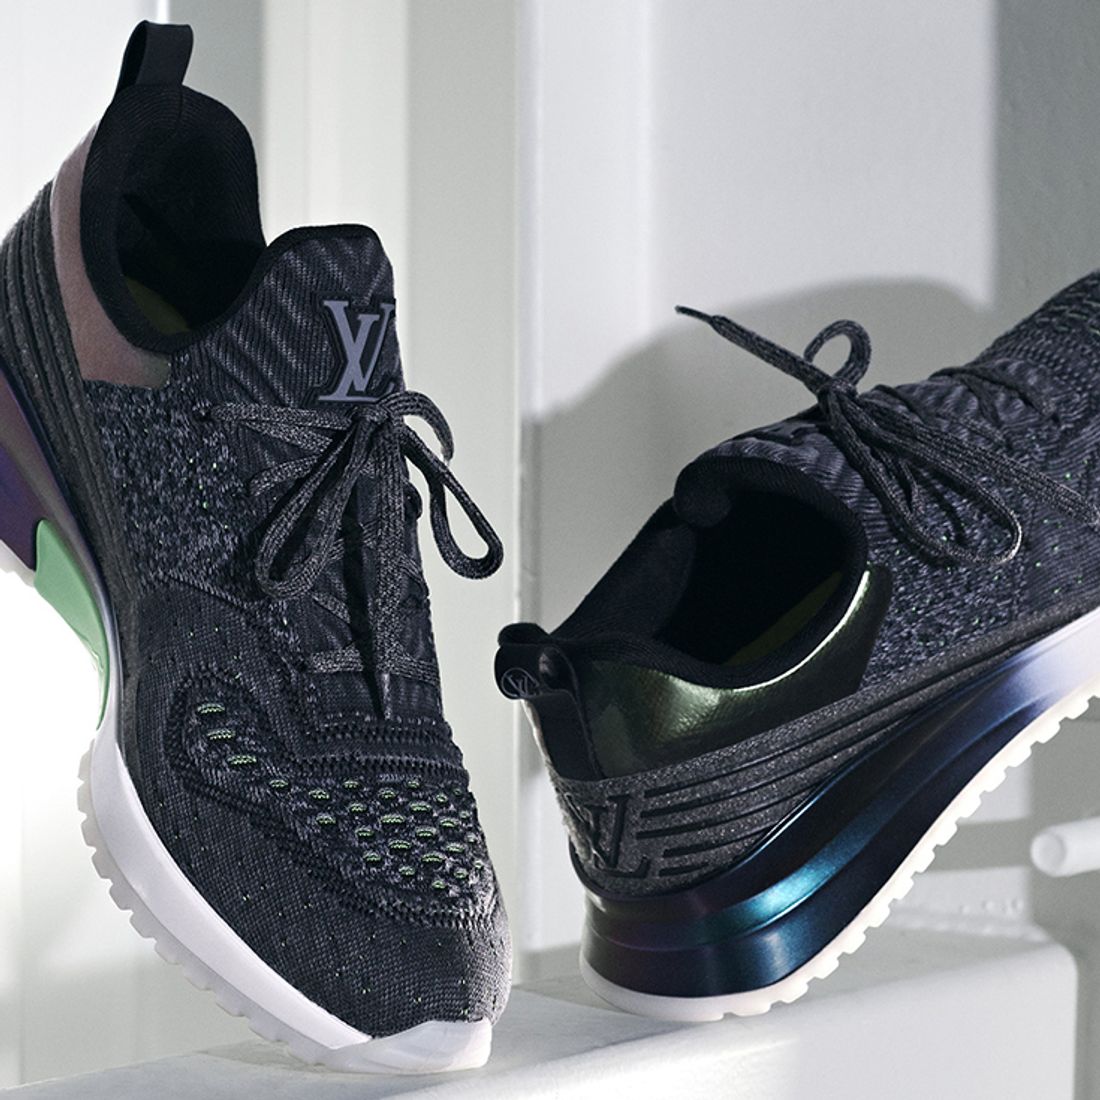 Louis Vuitton Want You to Run in Their Latest $1000+ Sneakers